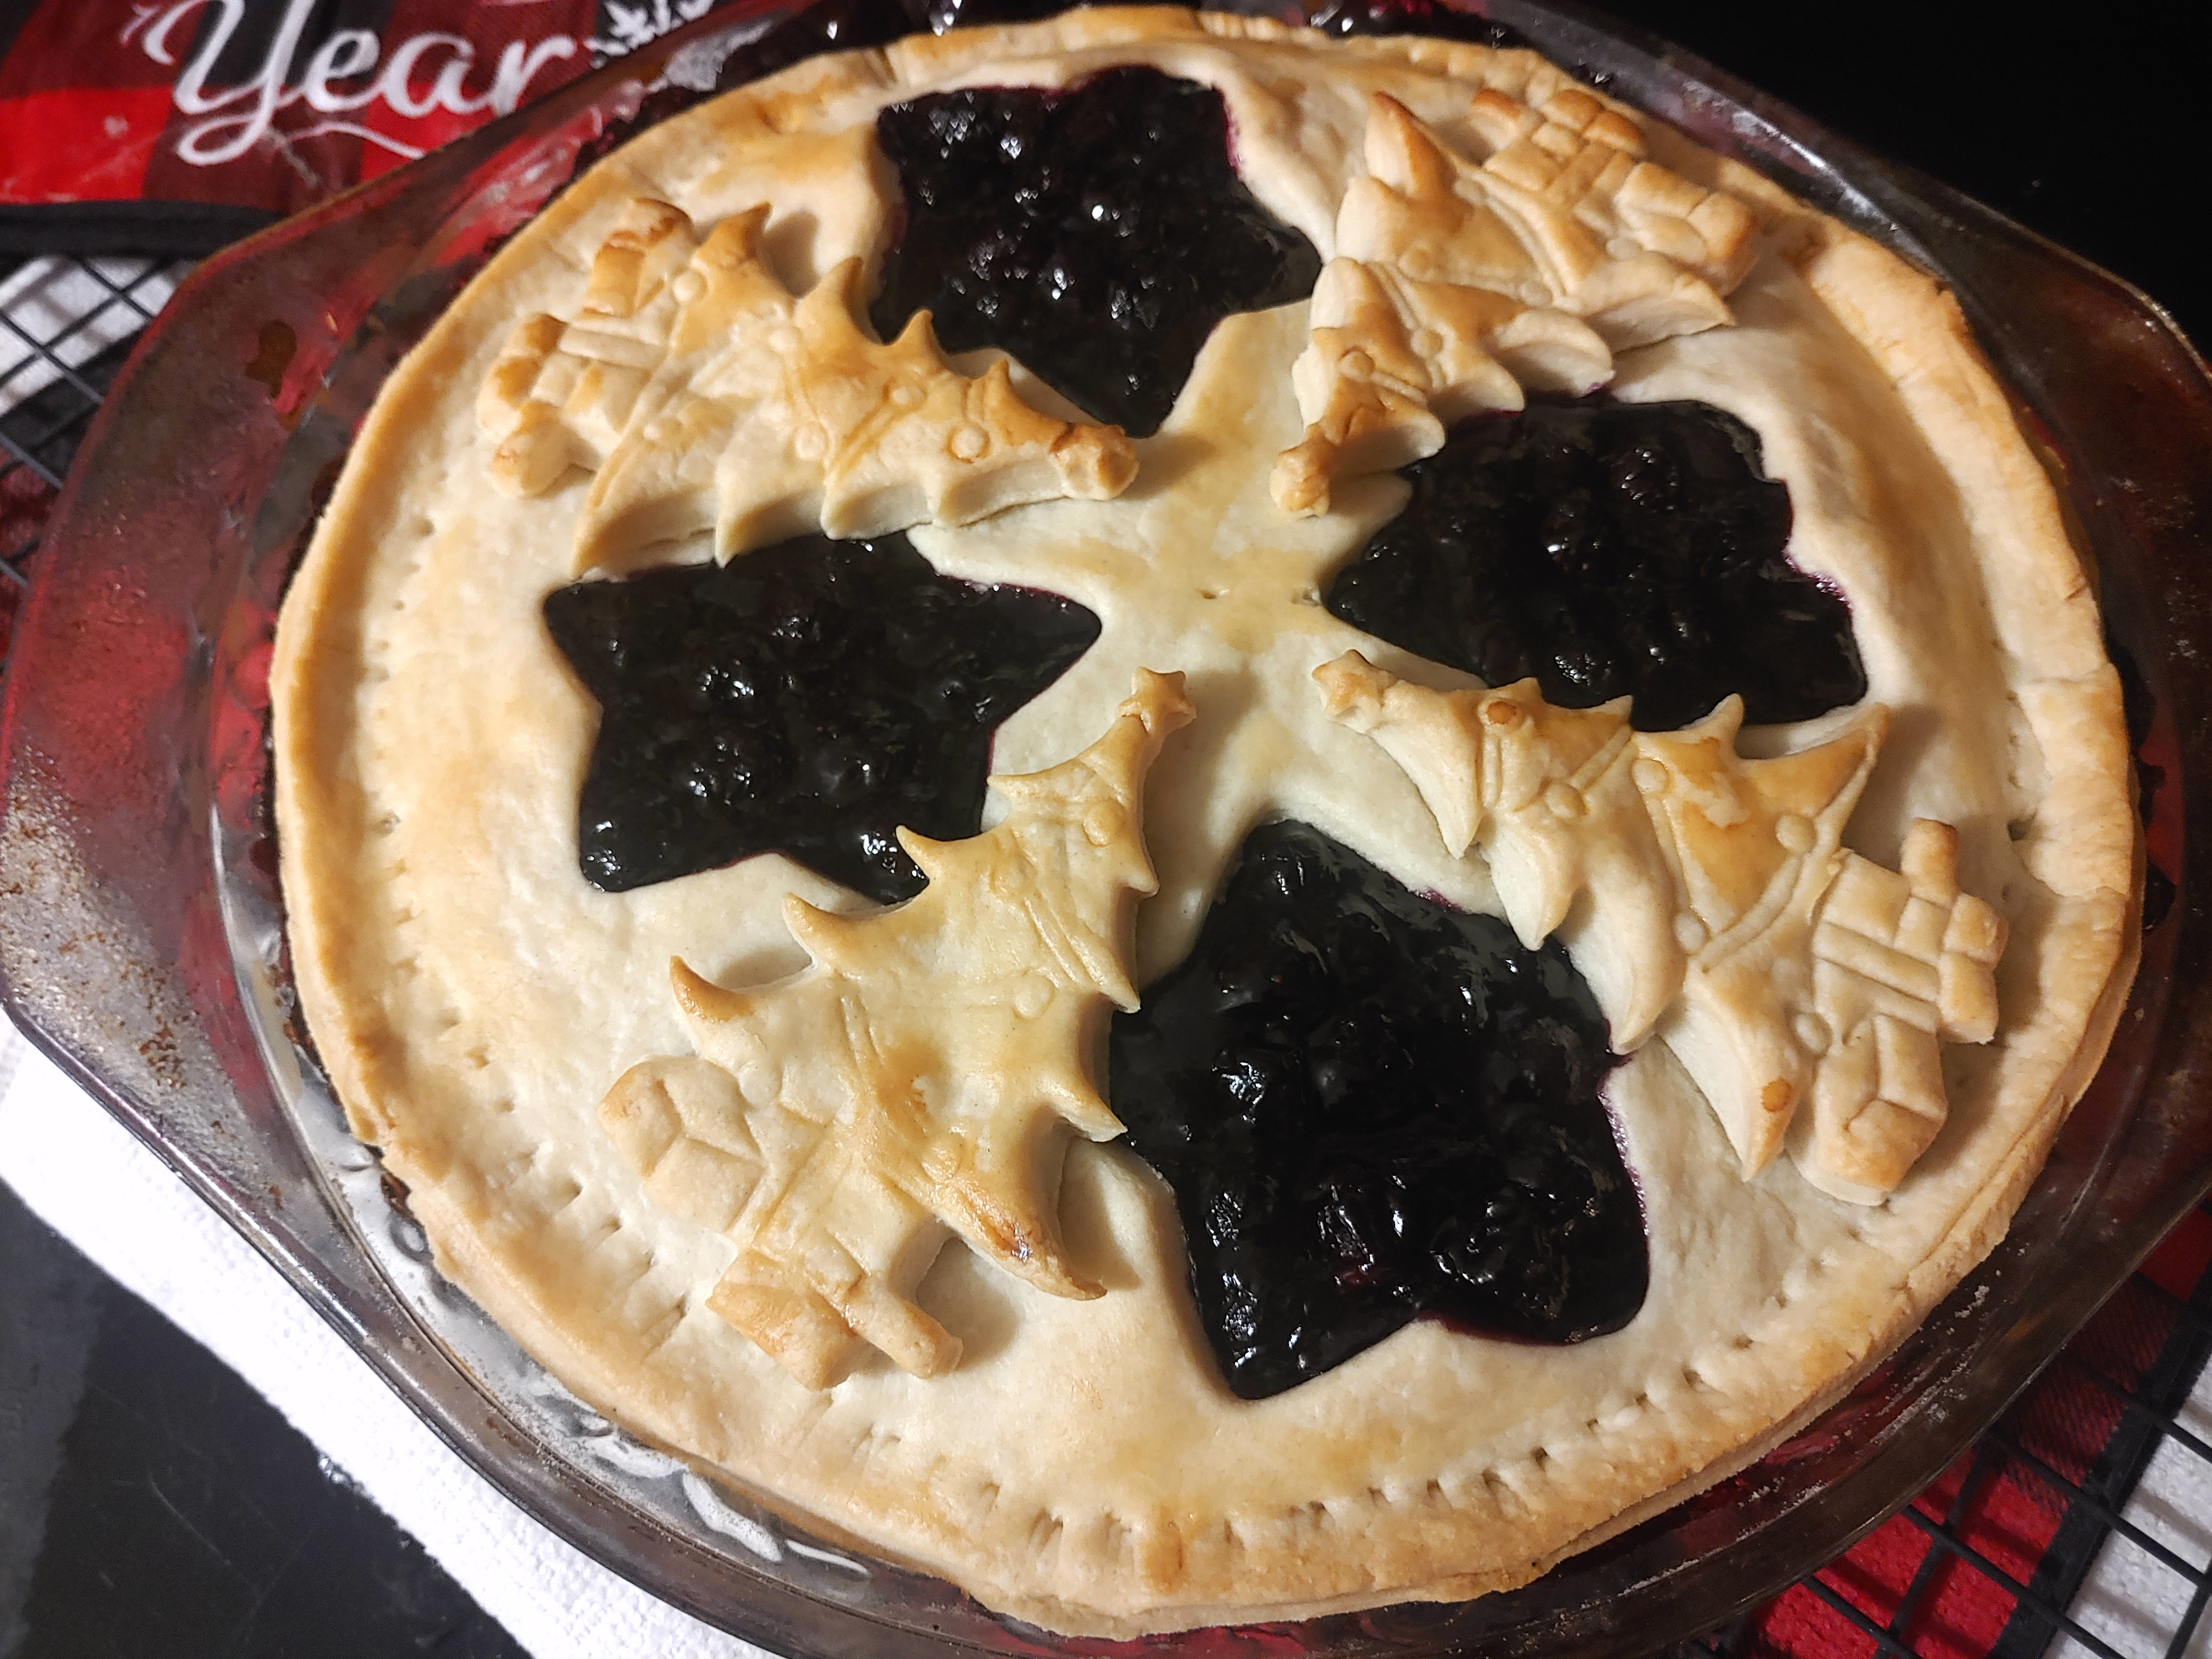 Blueberry Pie with Frozen Berries dontbakeme